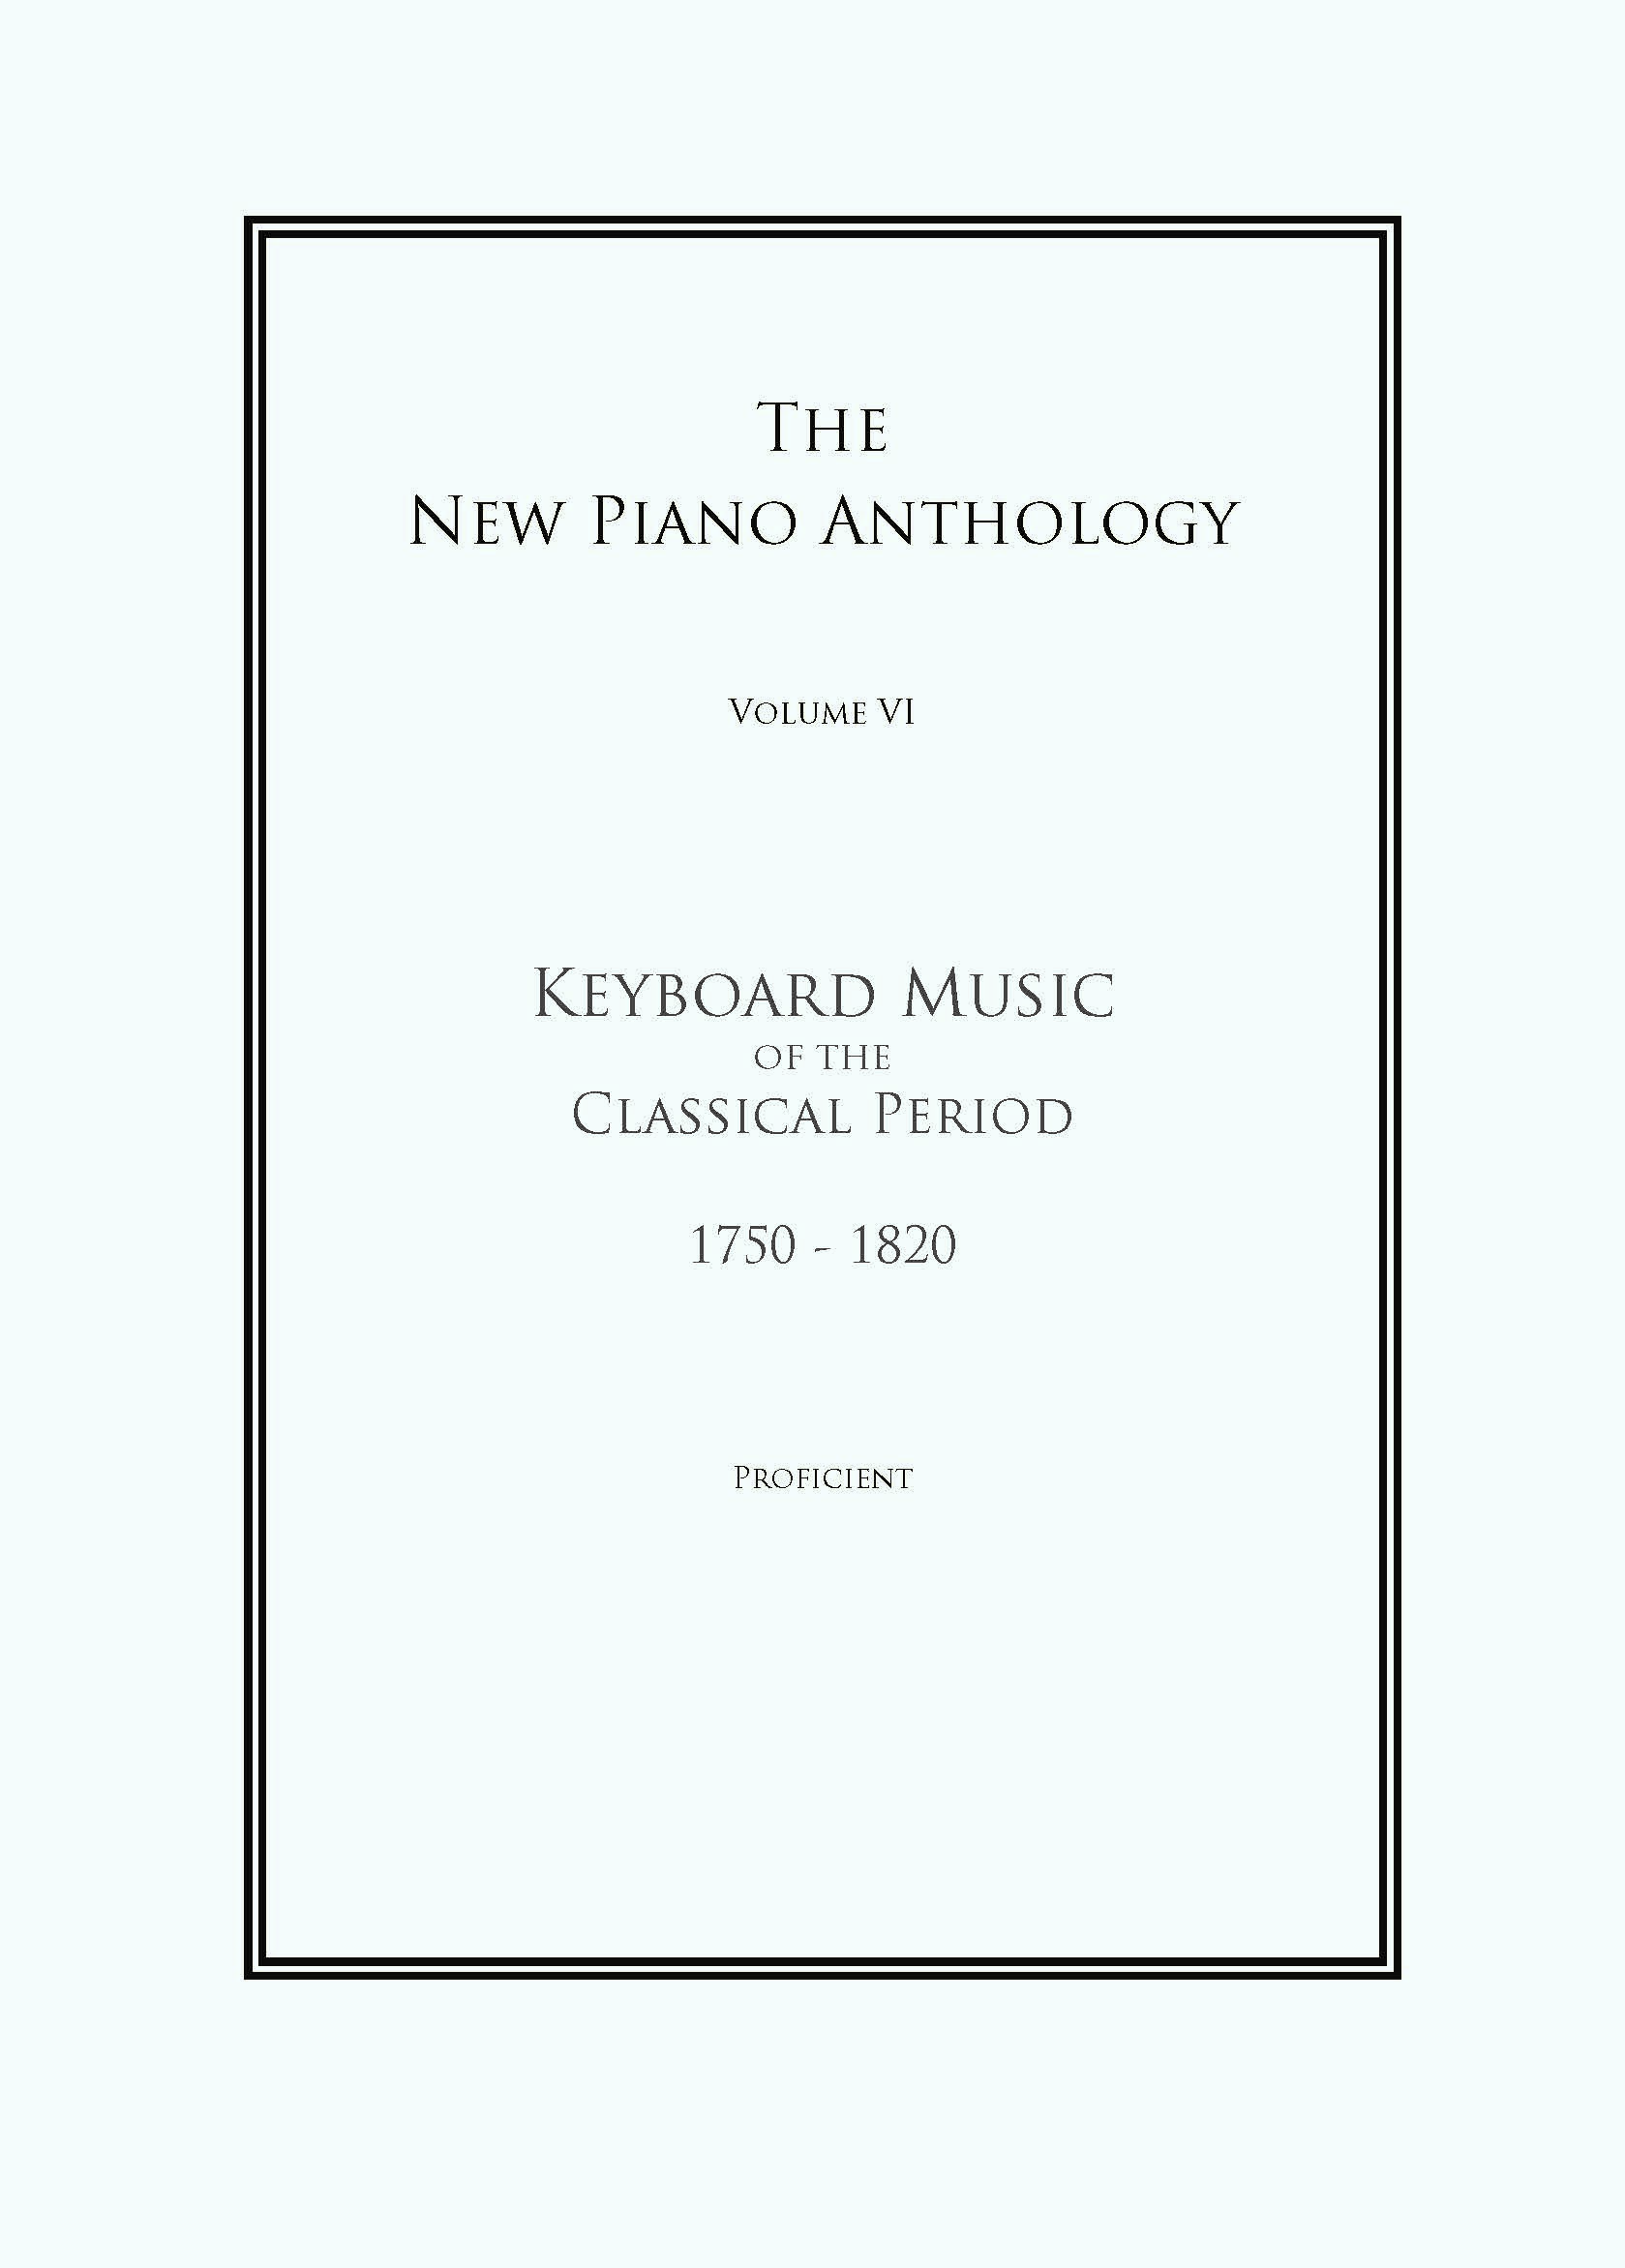 Keyboard Music of the Classical Period (Proficient)